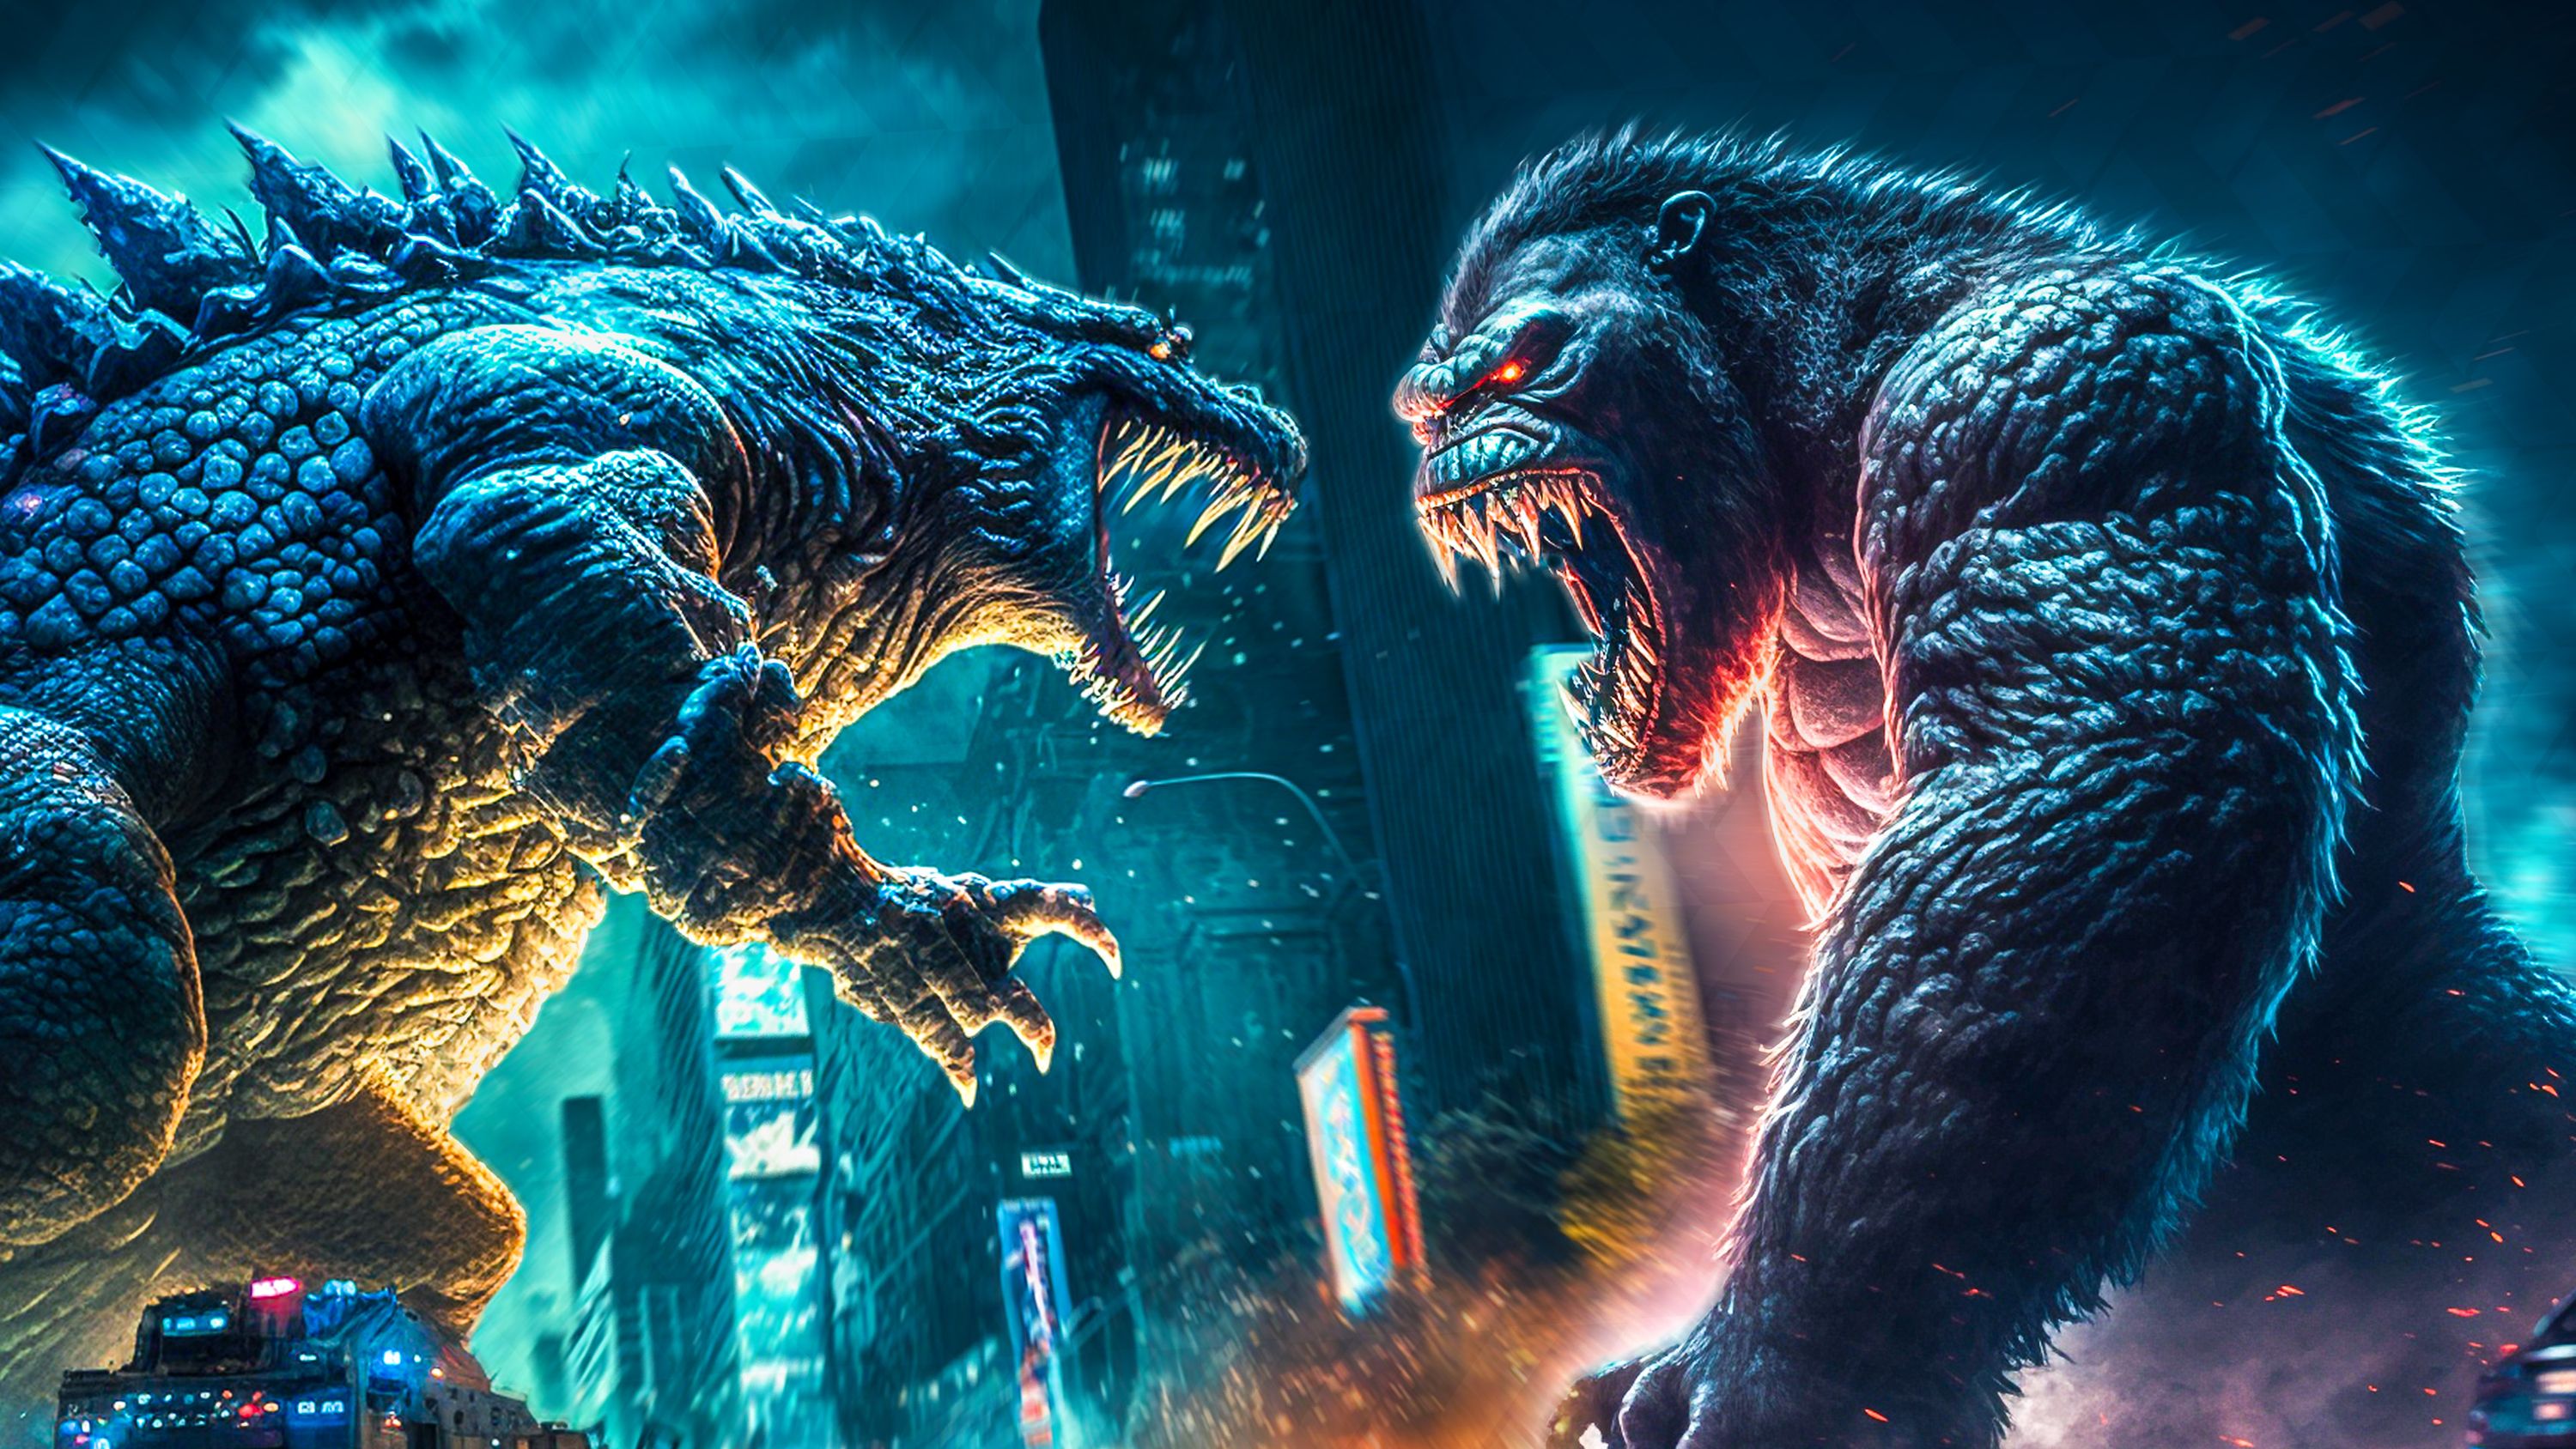 Godzilla x Kong: The New Empire wallpaper Resolution 3000x1688 | Best Download this awesome wallpaper - Cool Wallpaper HD - CoolWallpaper-HD.com